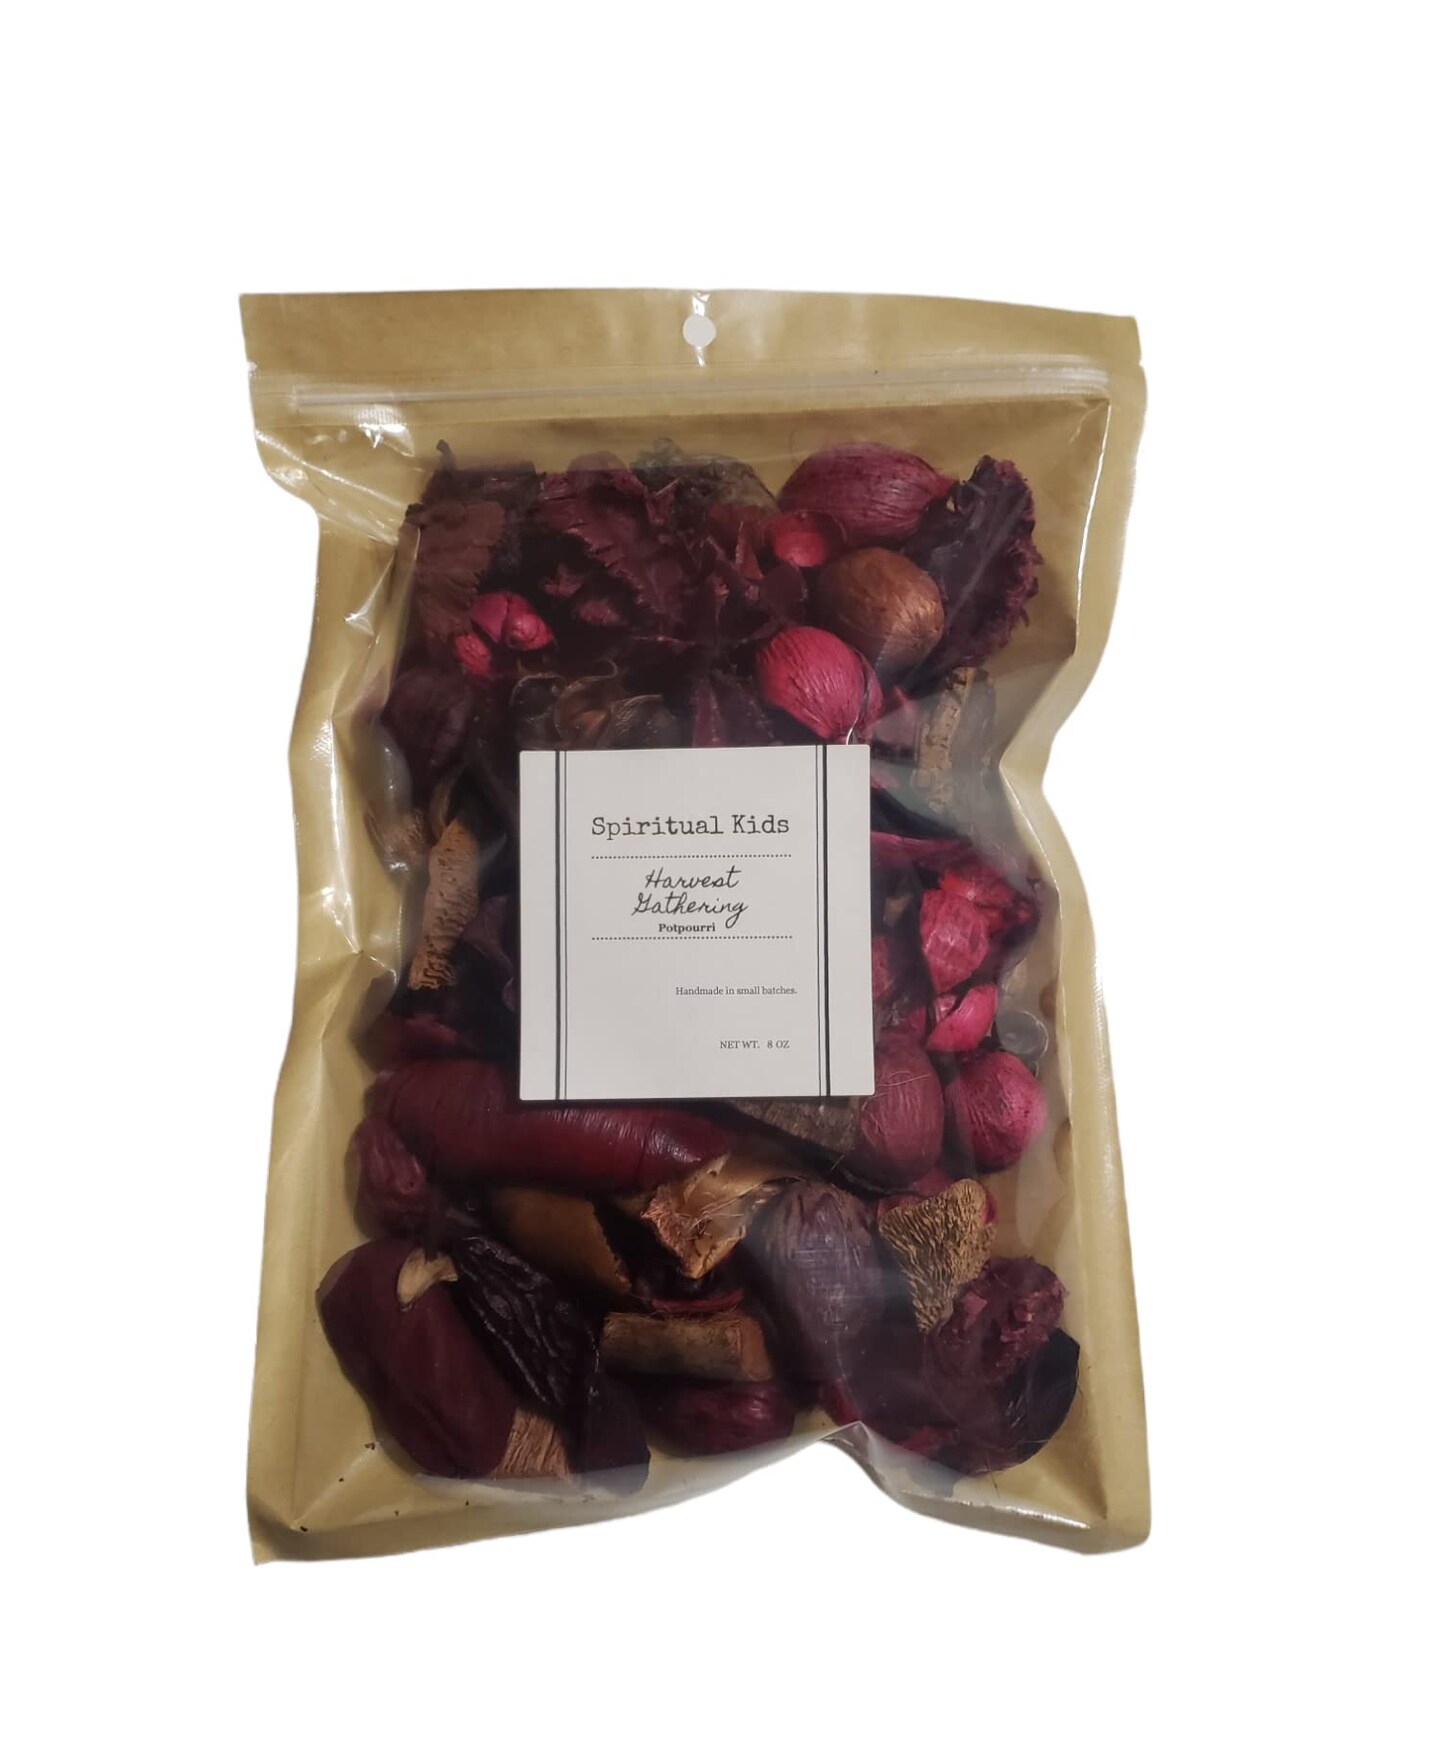 Harvest Gathering Potpourri 8oz Bag made with Fragrant/Essential Oils Hand Made FREE SHIPPING SCENTED Christmas Gift House Warming Gift! | Fall Potpourri | Fruity Potpourri |